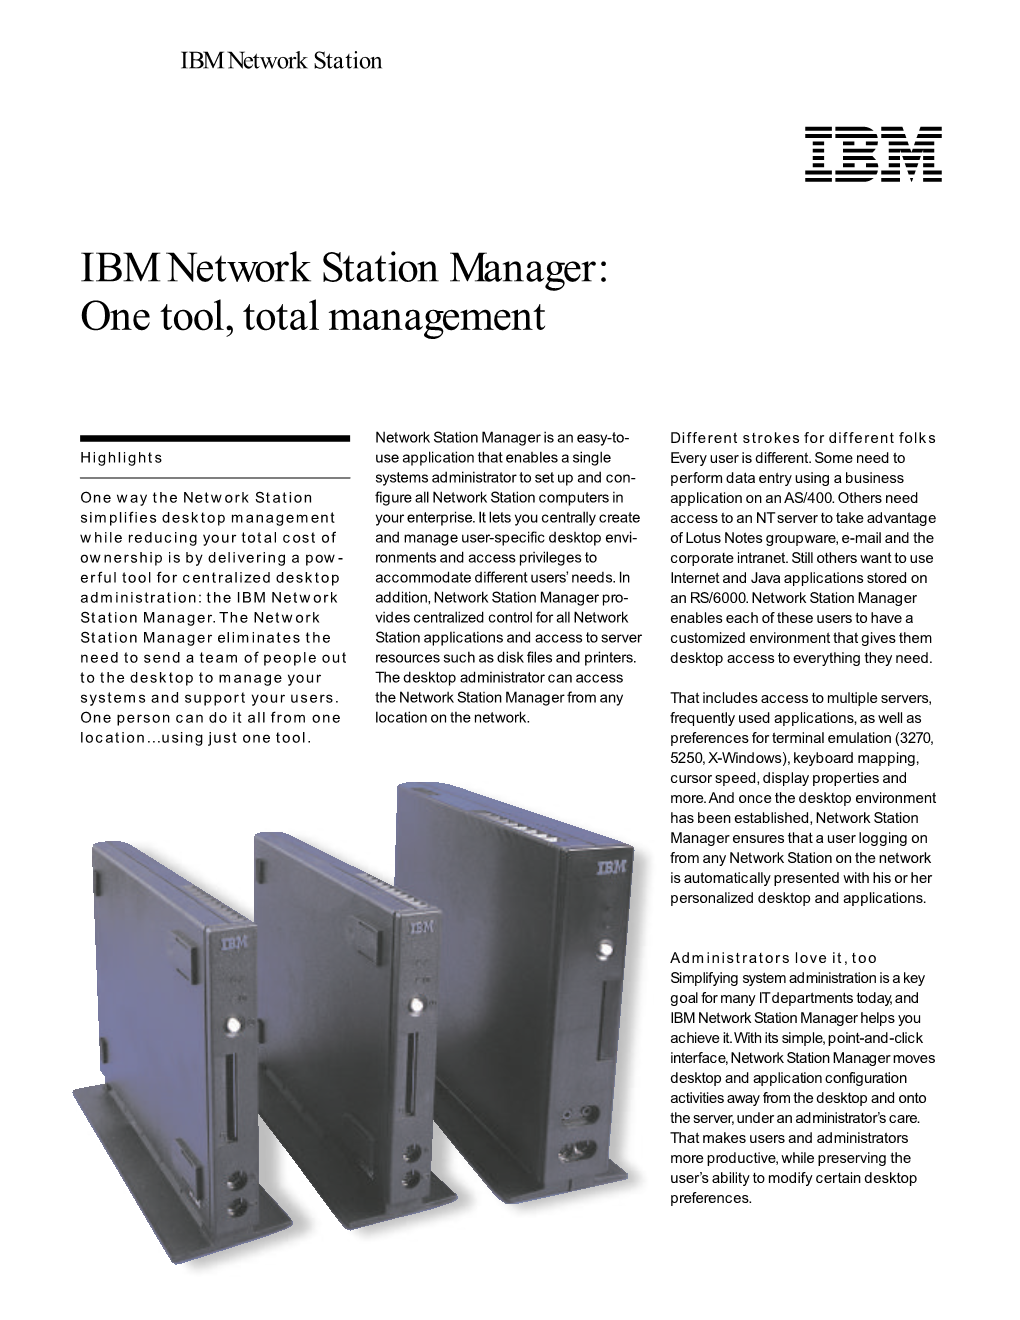 IBM Network Station Manager: One Tool, Total Management